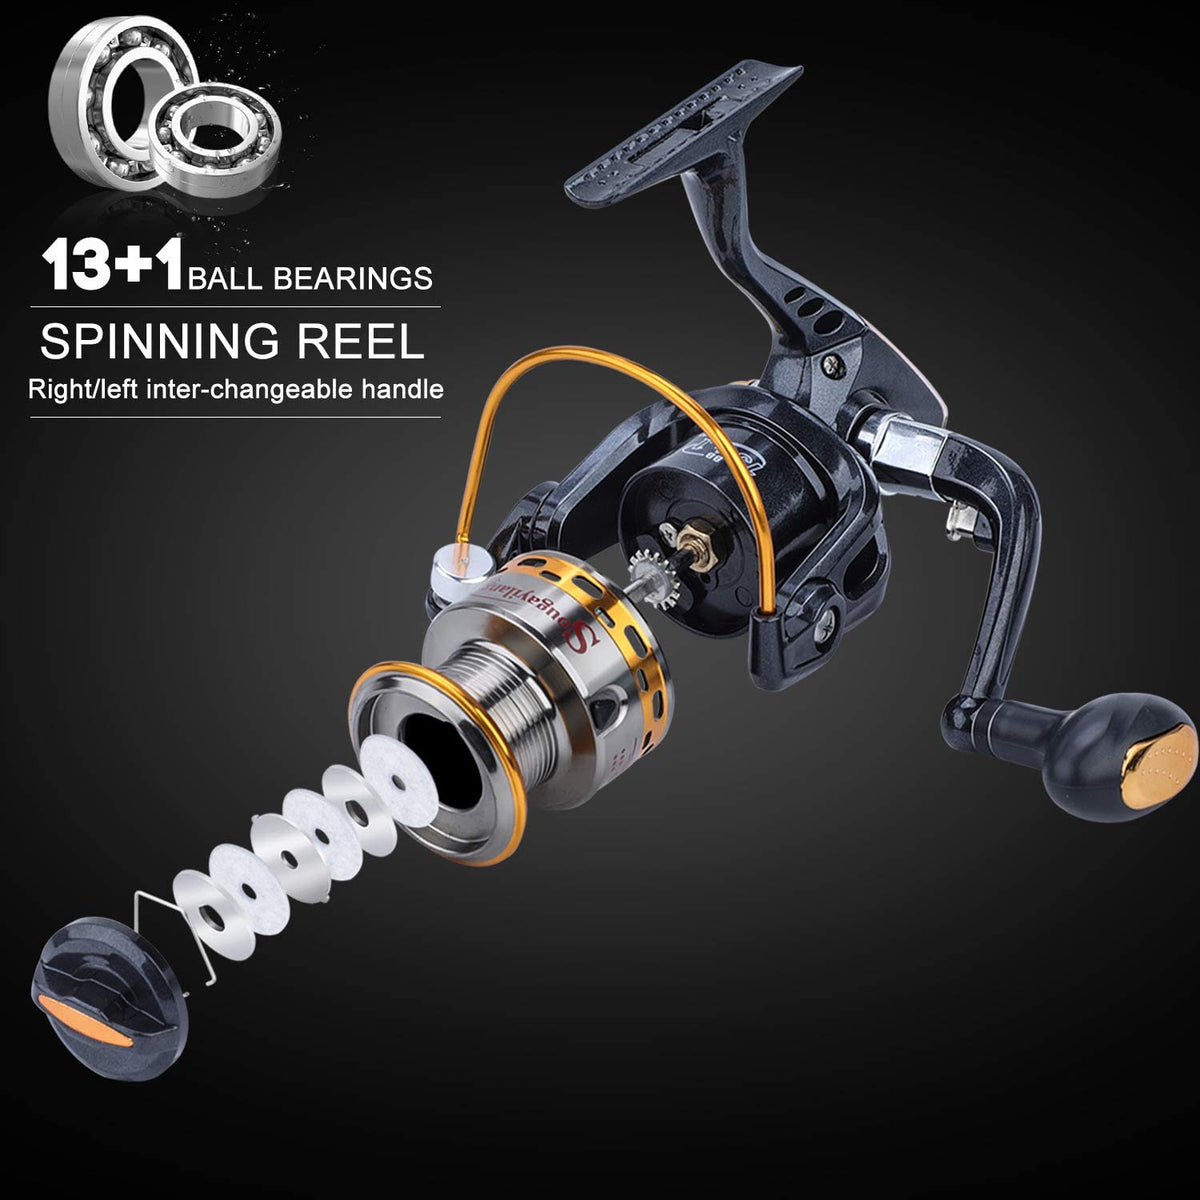 Sougayilang Catfish Fishing Rod and Reel Spinning Combo,Comfortable EVA  Non-Slip Grips,Aluminum Reel Seat and Size 5000 Carp Spinning Reel for